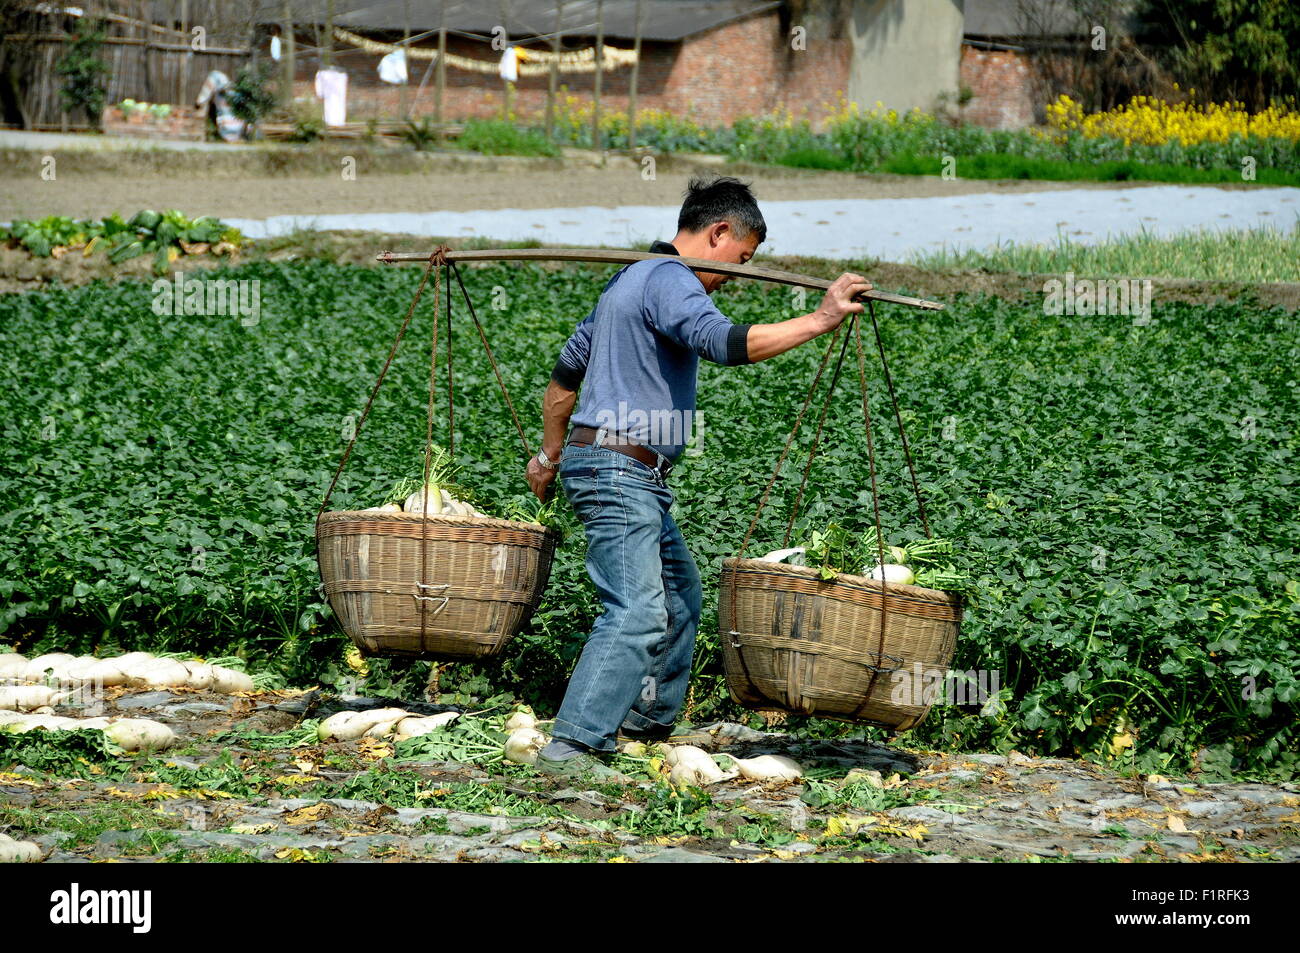 Pengzhou, China - Chinese farmer carrying two baskets filled with Daikon radishes suspended from a shoulder yoke Stock Photo